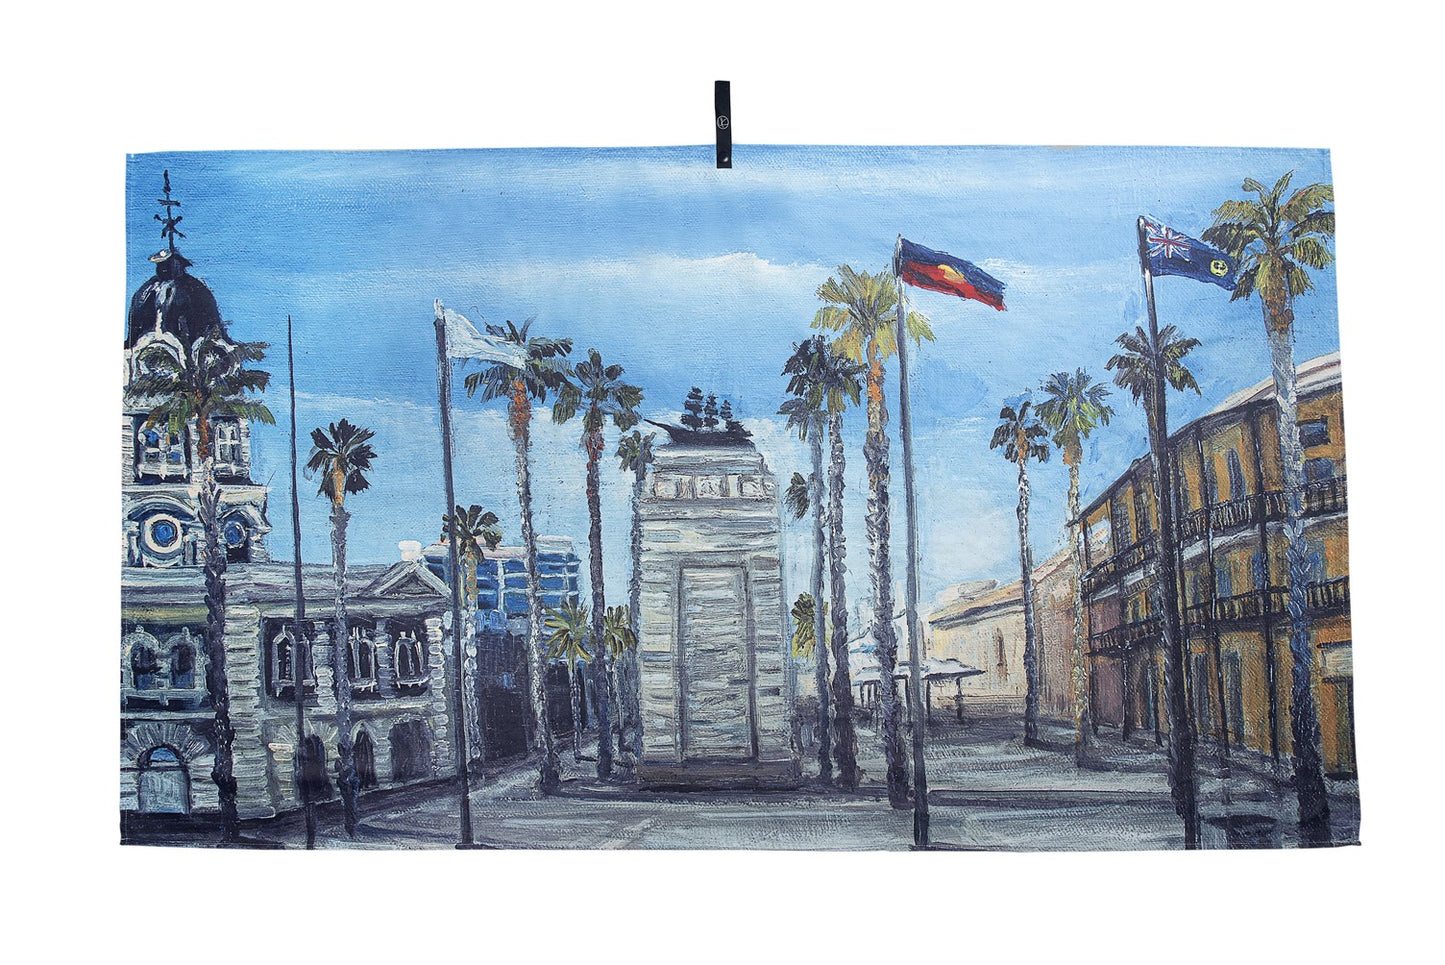 Glenelg Microfibre Artistic Towel. Our artistic towel shows the iconic Moseley square located in Glenelg, Adelaide. The artwork emphasis the Pioneer Memorial famous Tasmanian’s, the abundant palm trees, and the historical buildings. This Microfibre Artistic Towel is a true travel back in time! Large size, 170cm x 95cm, soft touch, highly absorbent and quick-drying, compact towel. An Aussie-inspired art showcasing magnificent landmarks and the Aussie lifestyle.